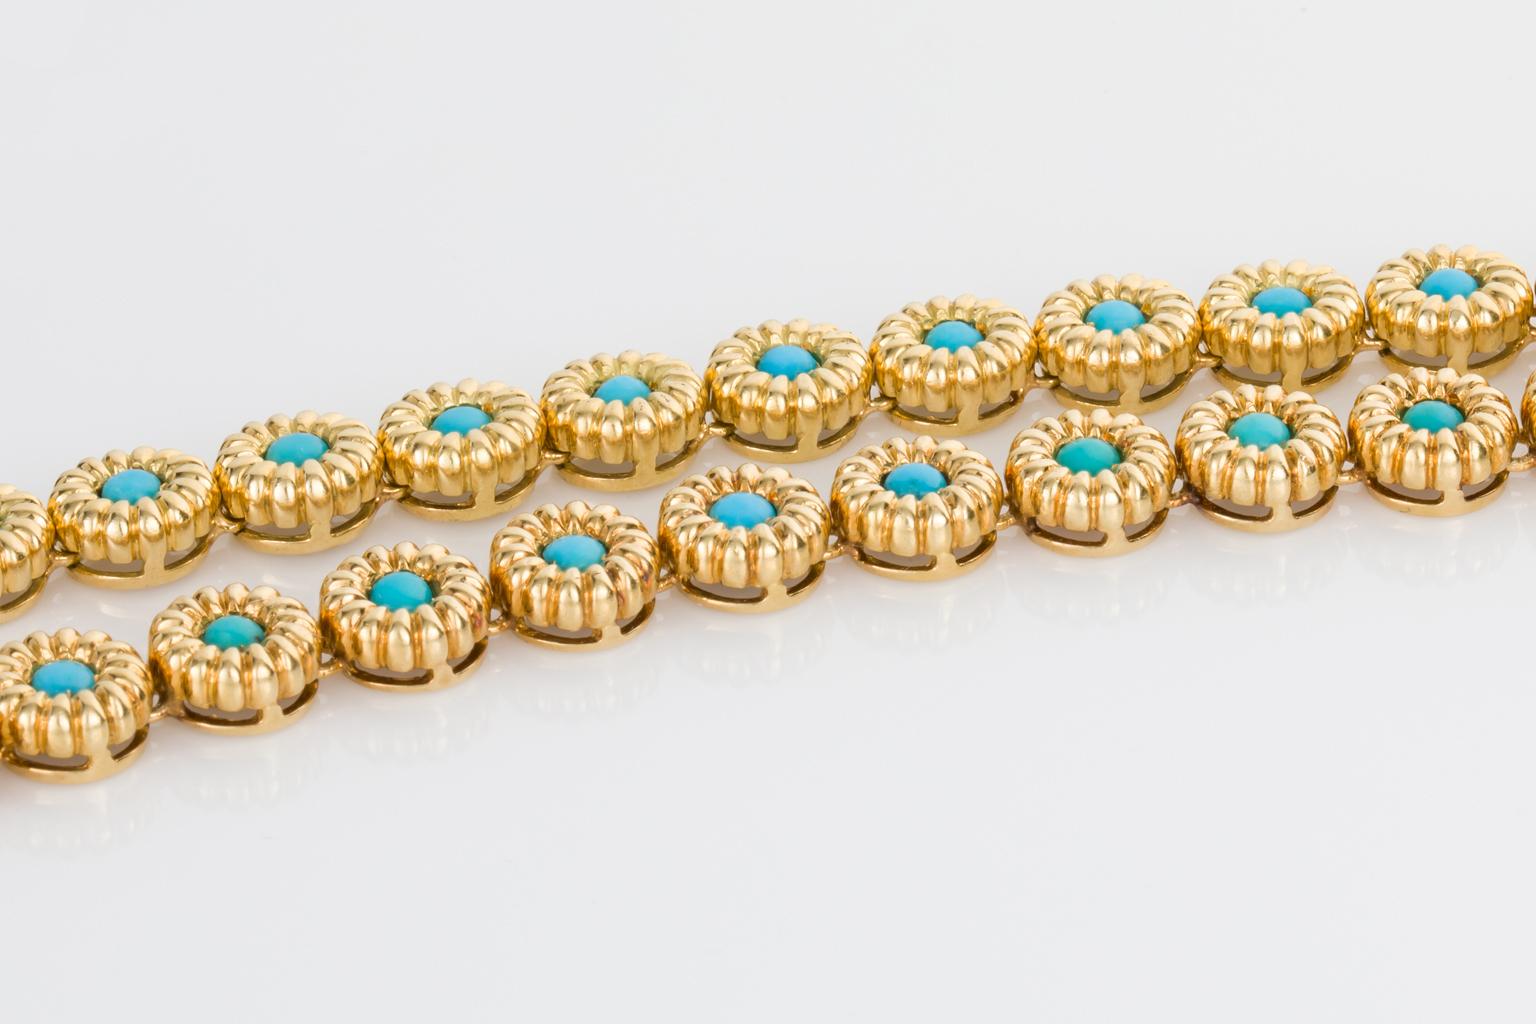 18 Karat Yellow Gold Turquoise Bracelets or Choker Necklace In Excellent Condition For Sale In QLD , AU